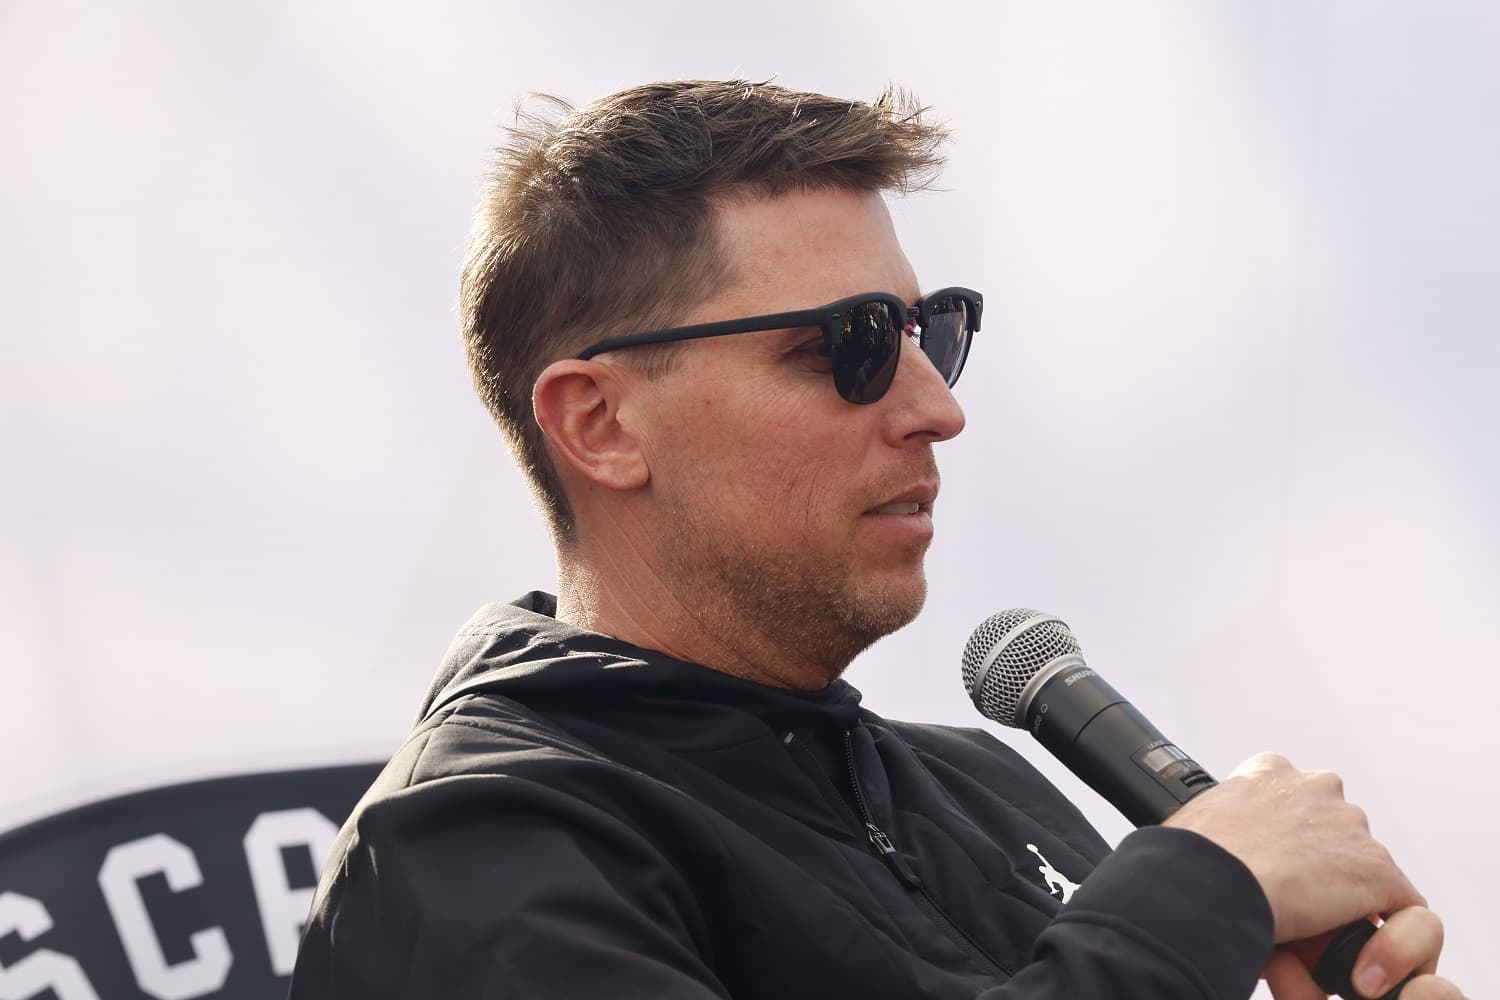 Denny Hamlin at fanfest before the start of the NASCAR Cup Series Busch Light Clash at The Coliseum on Feb. 5, 2023.